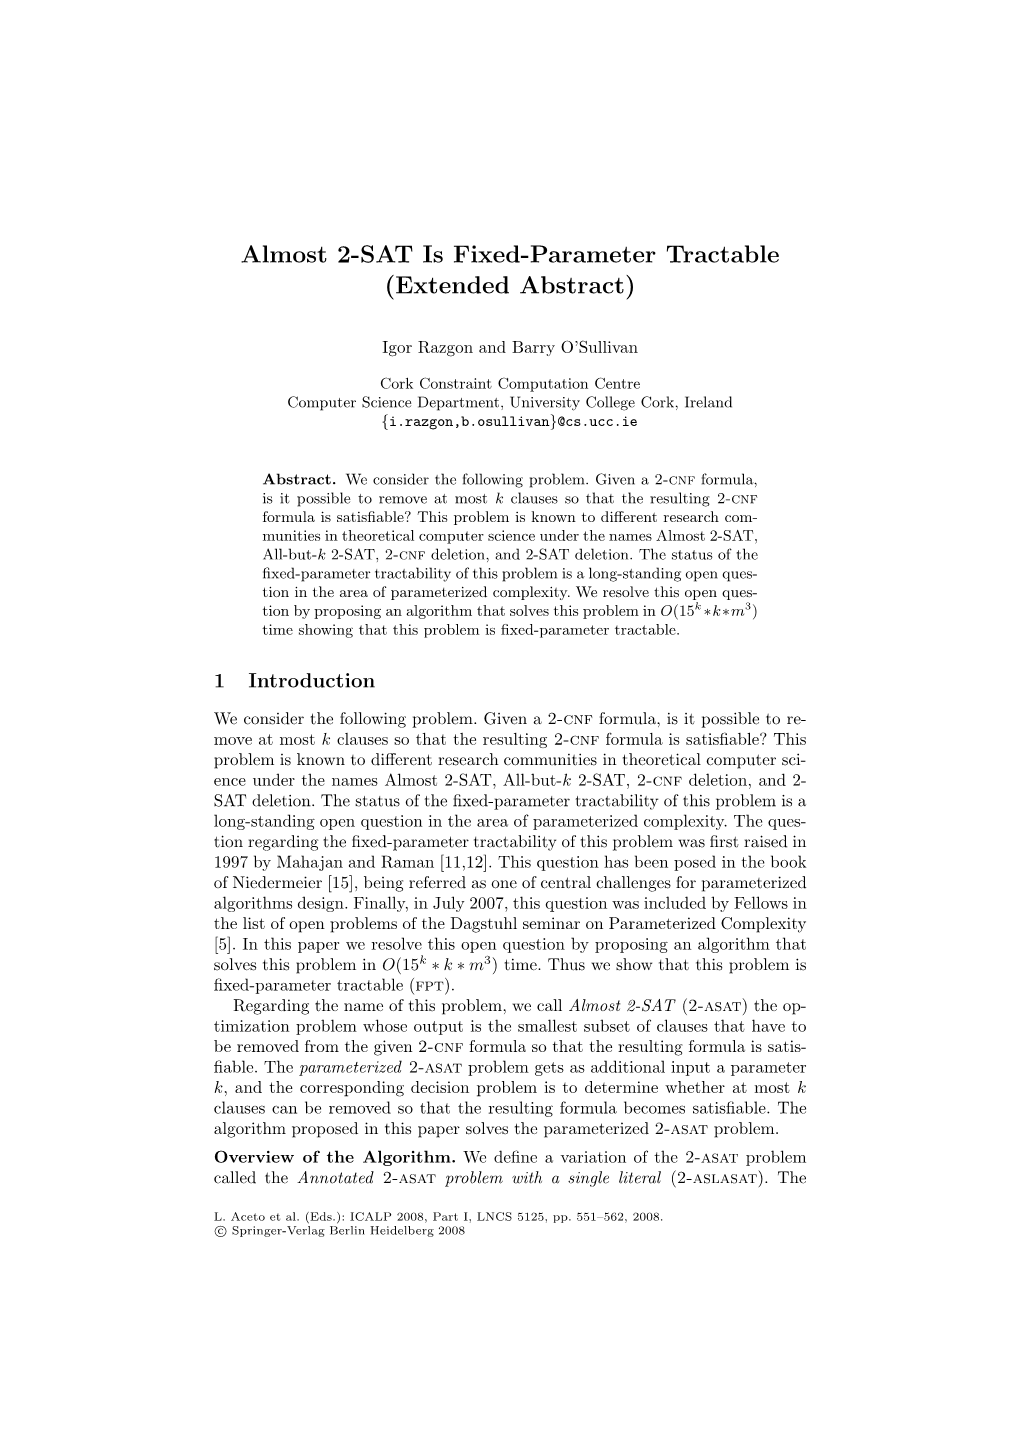 Almost 2-SAT Is Fixed-Parameter Tractable (Extended Abstract)